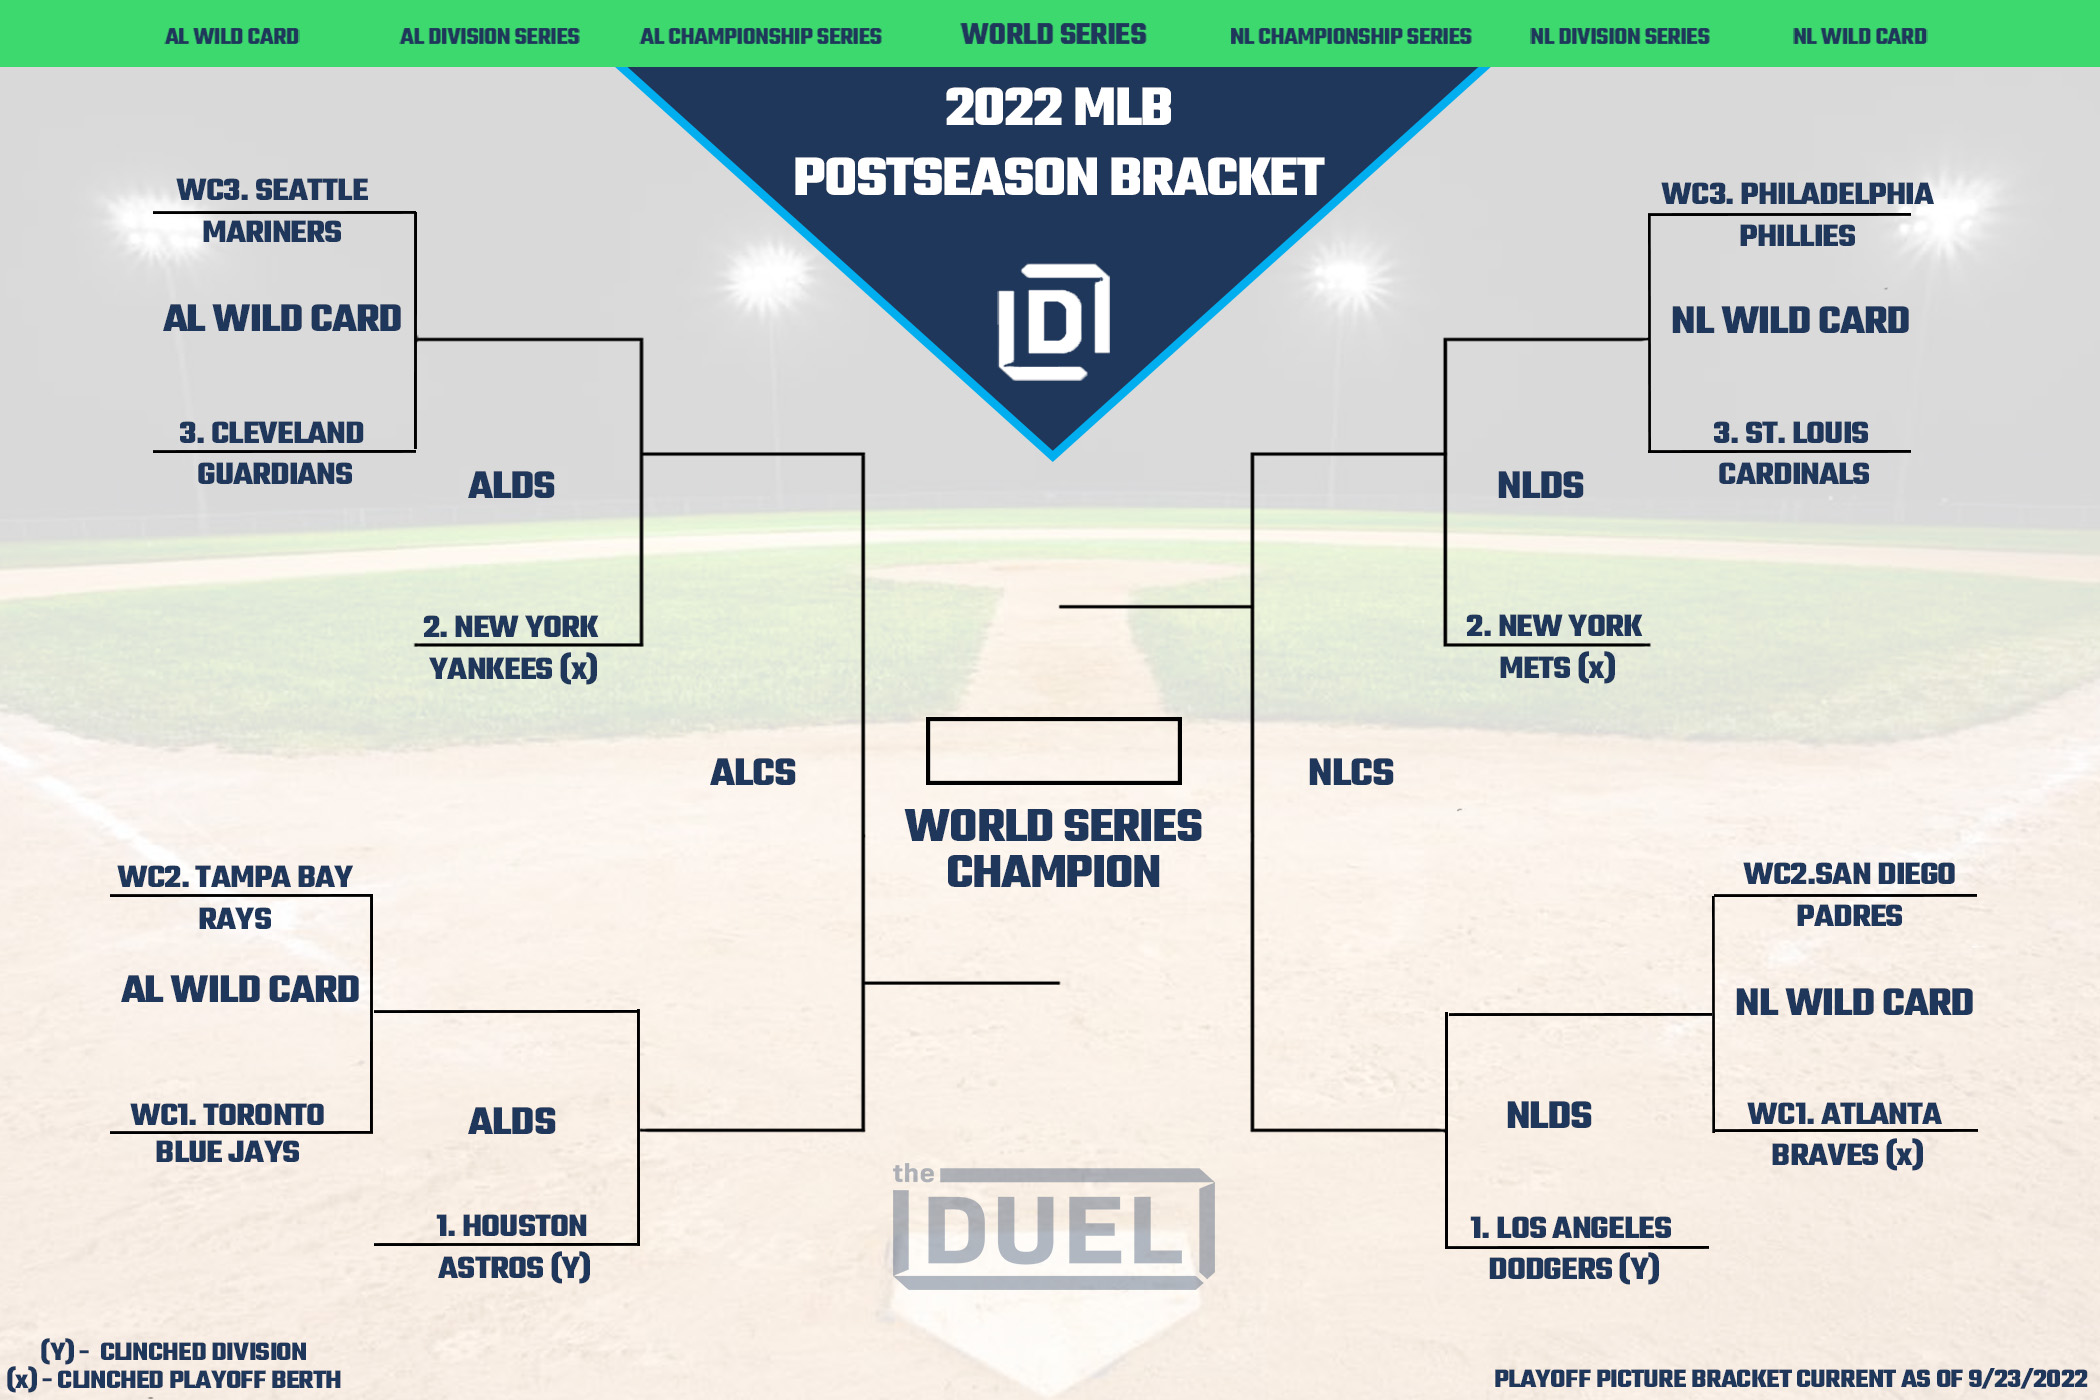 MLB Playoff Picture Bracket for the 2022 Postseason as of September 23